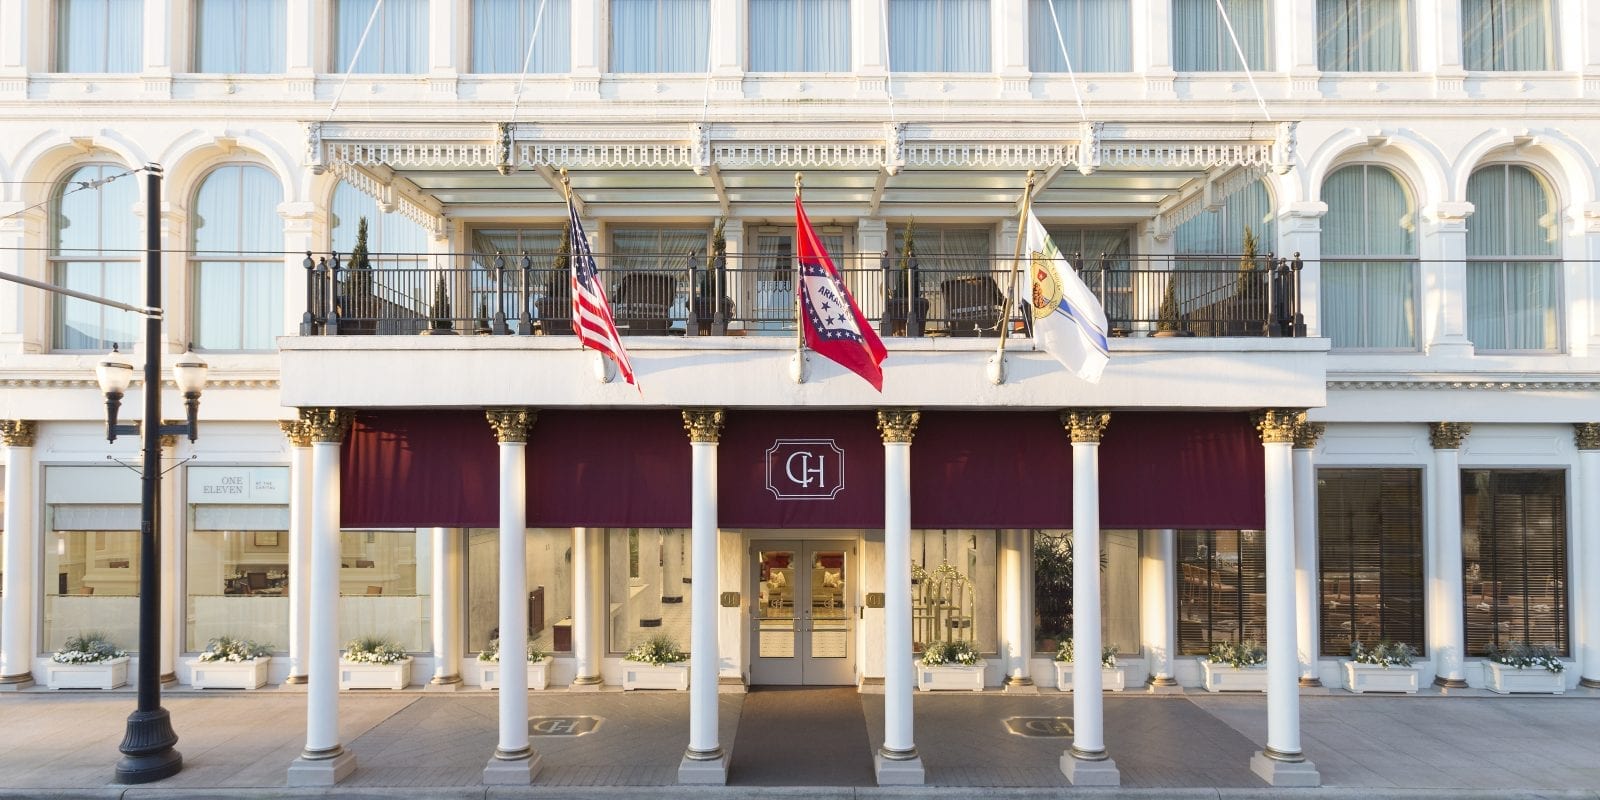 Image of the exterior of the Capital Hotel in Little Rock